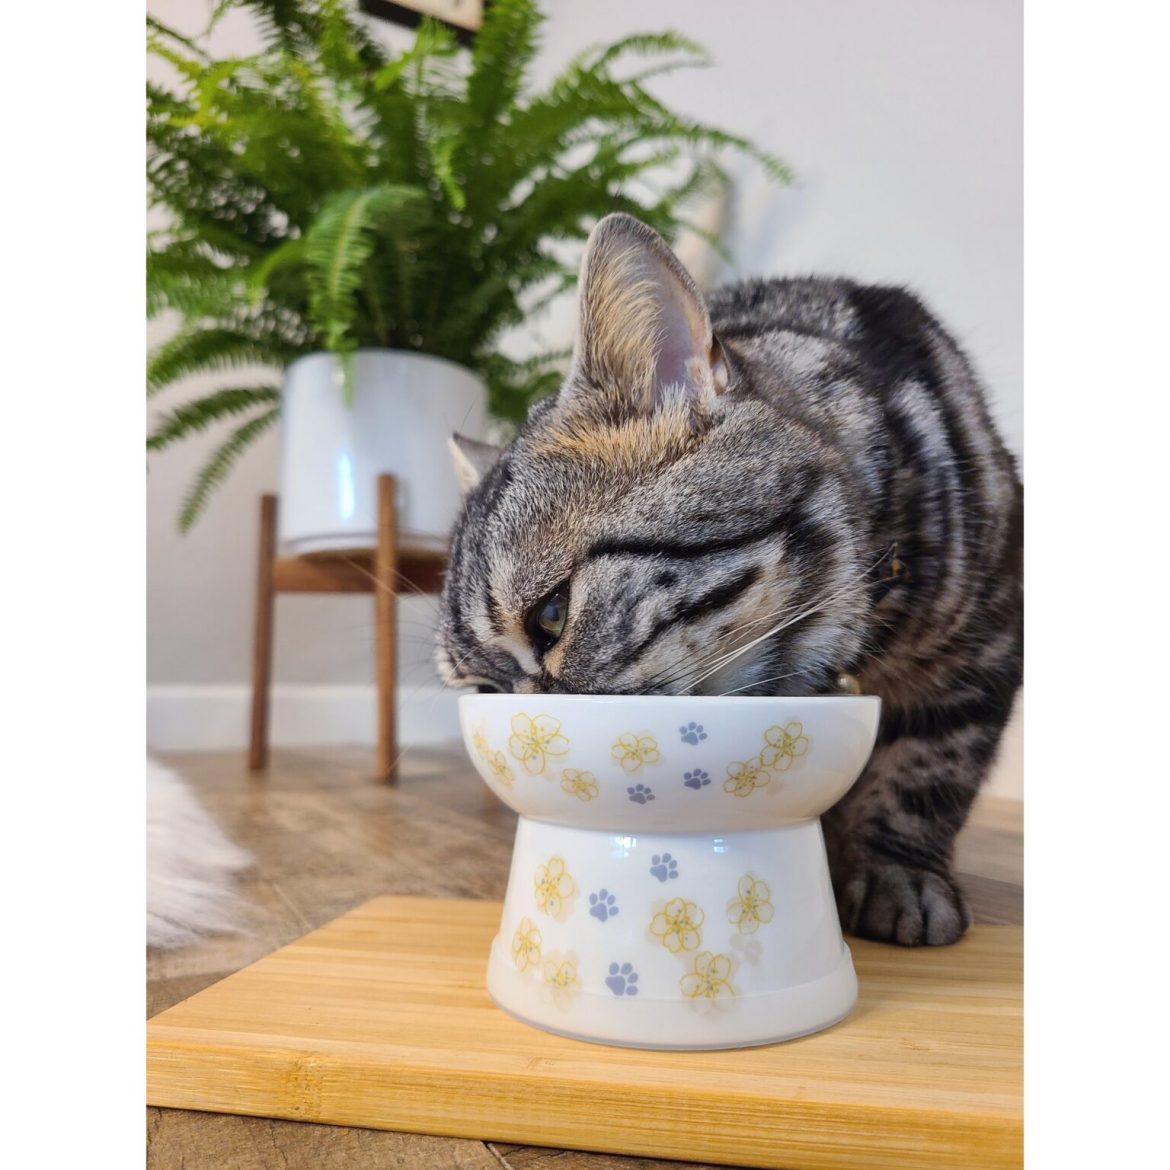 What Are the Benefits of Raised Cat Food Bowls?